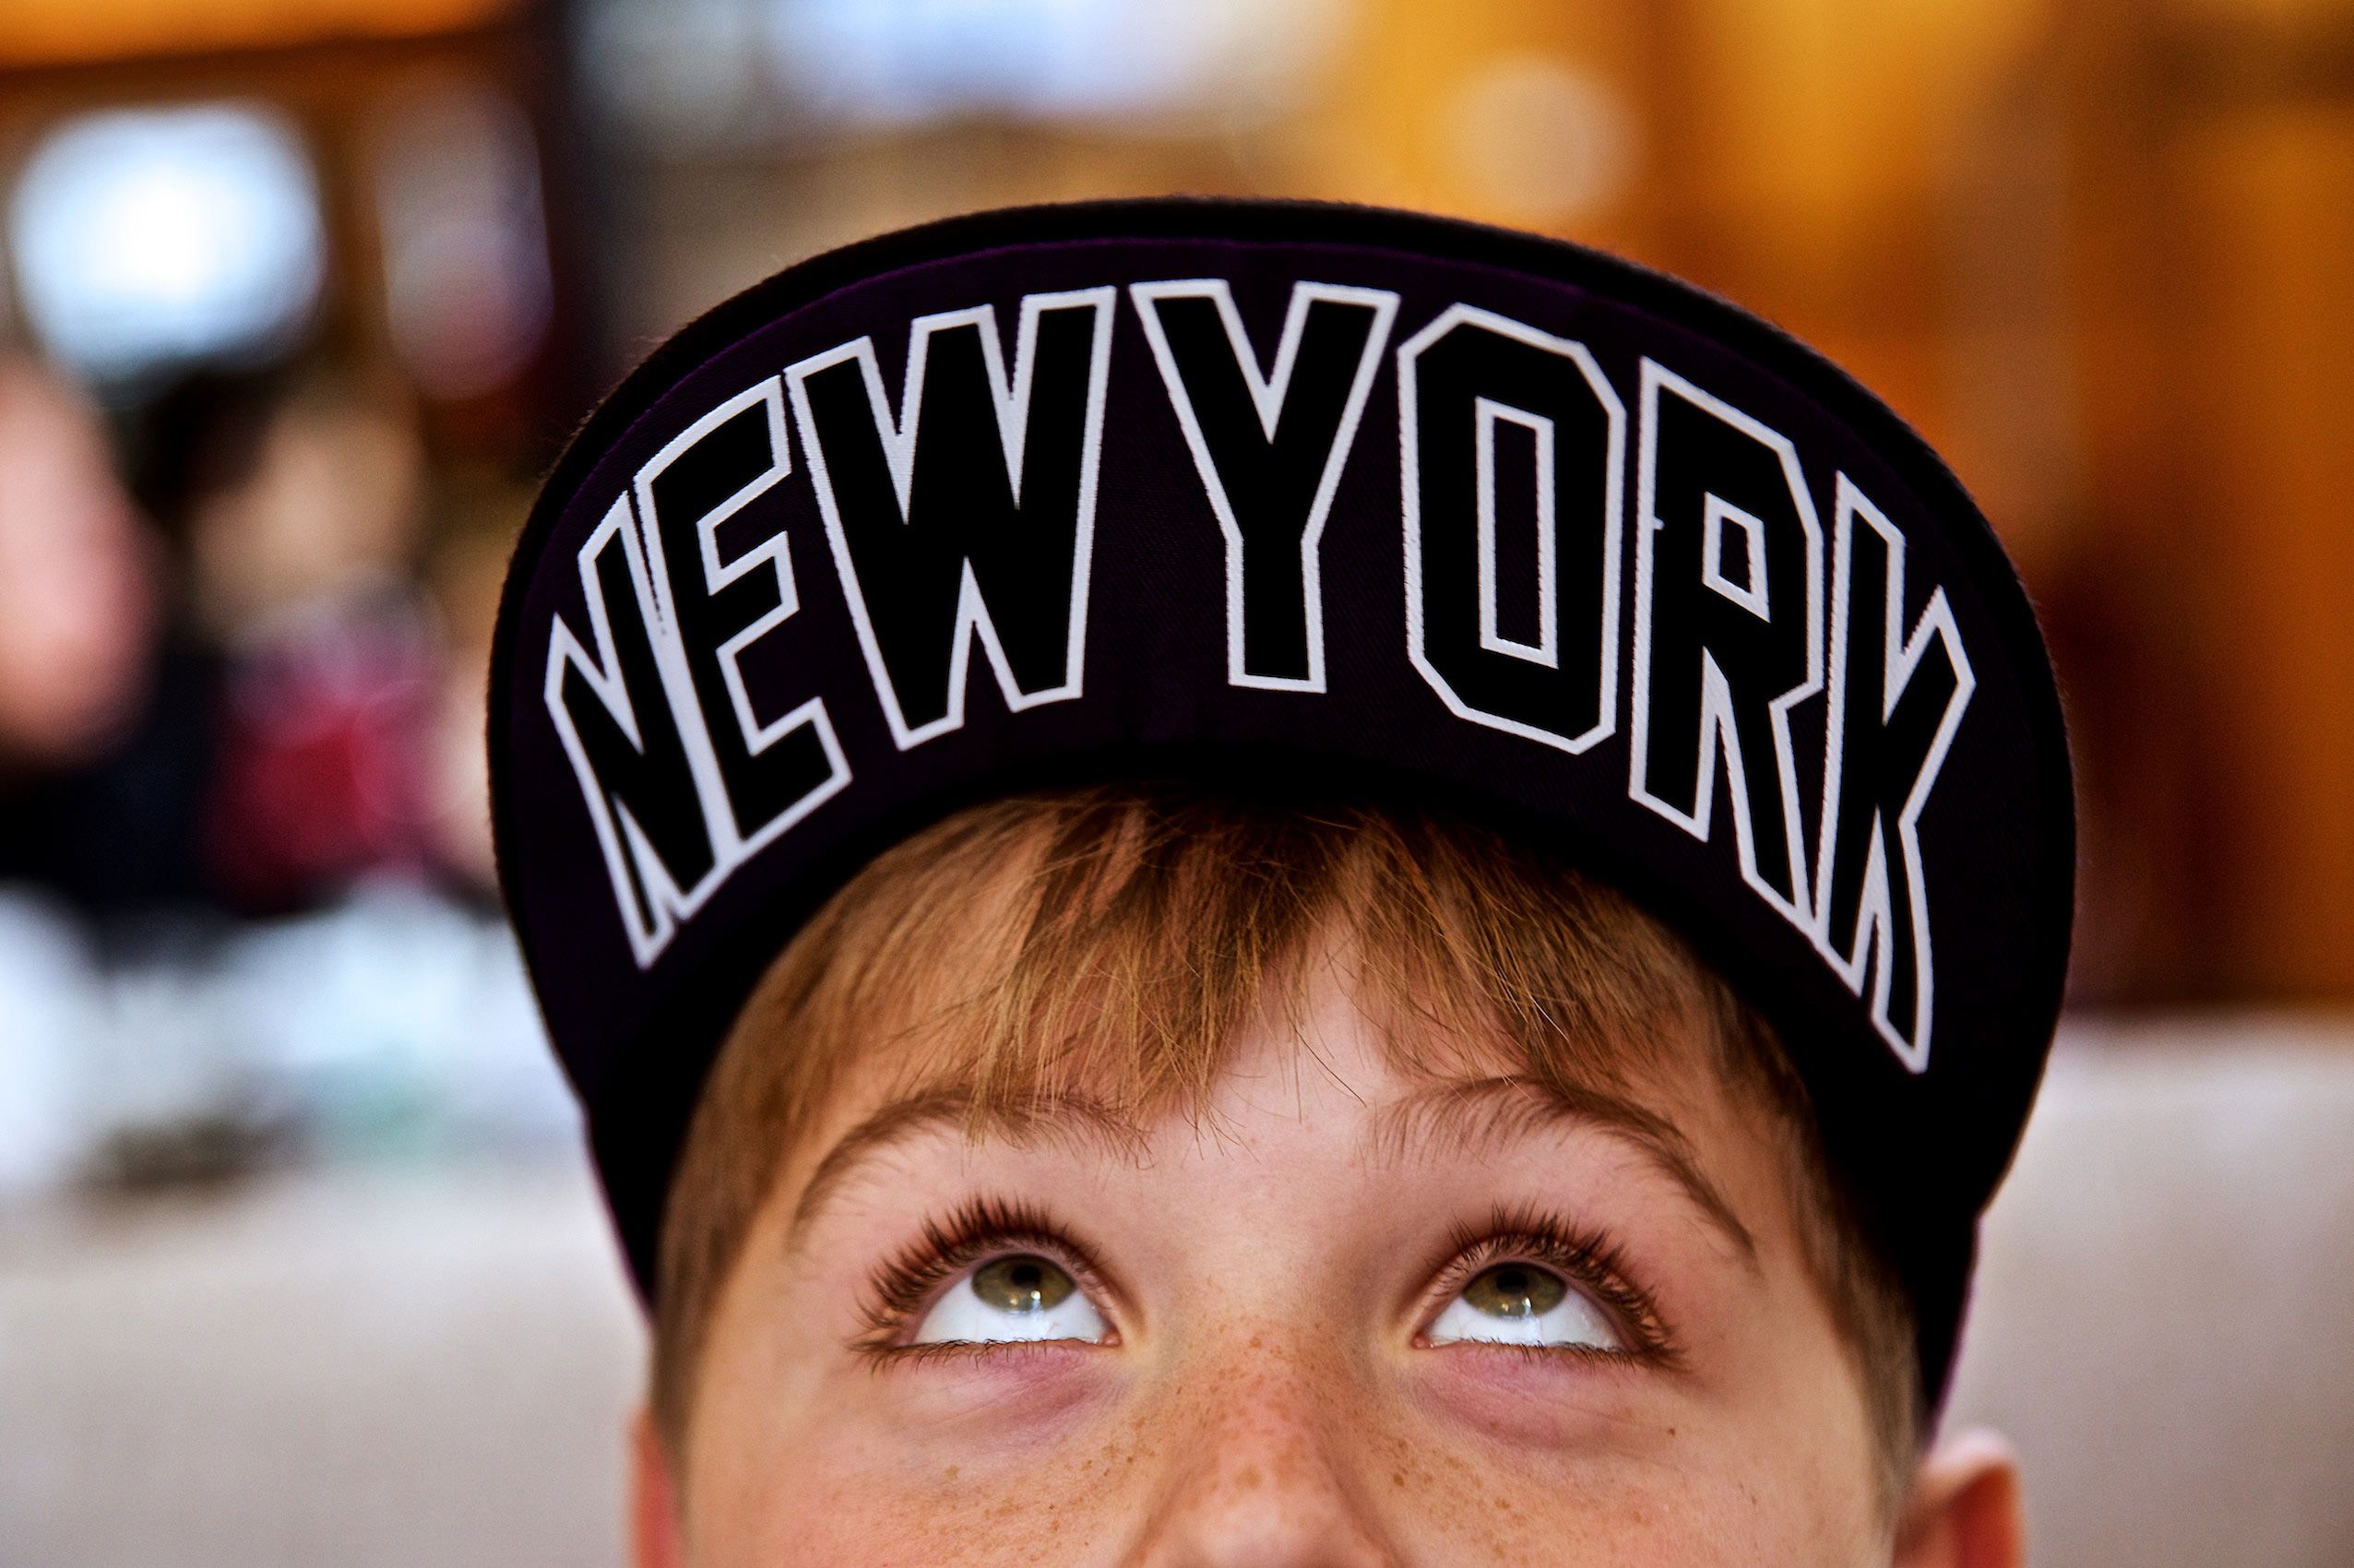 Boy With New York Hat